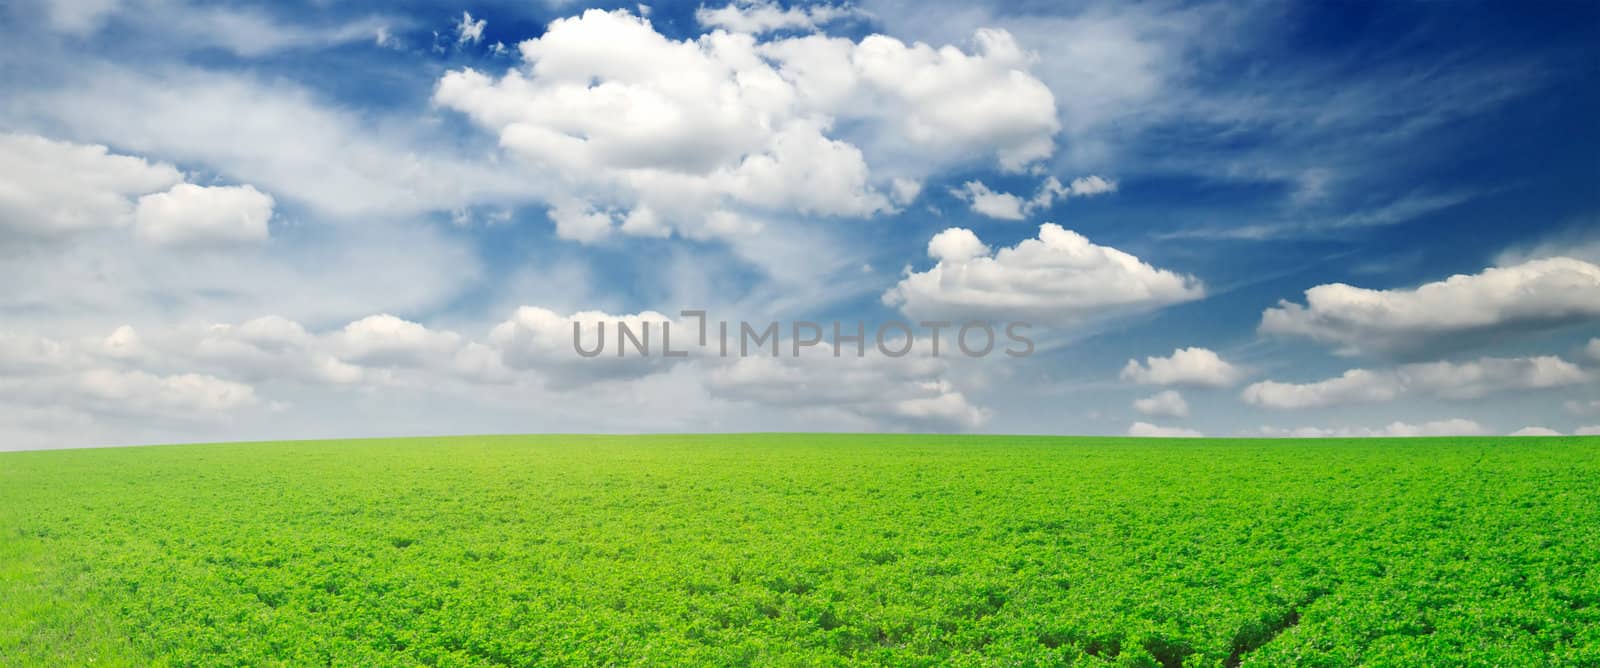 white clouds and a green field